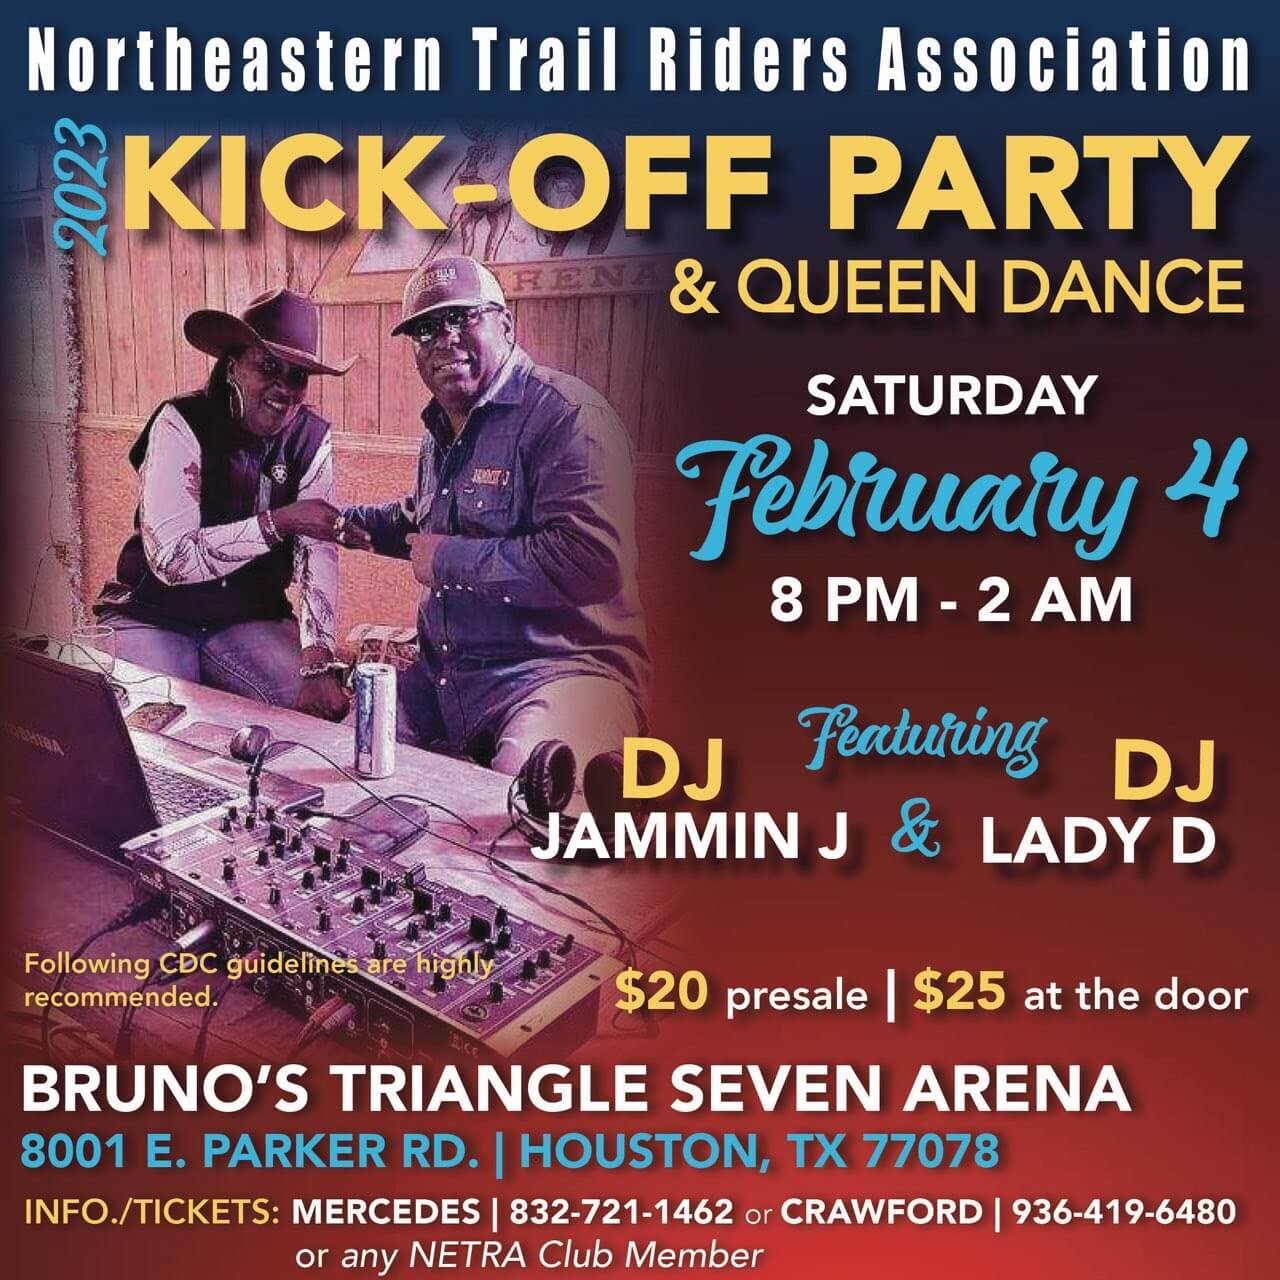 Northeastern Trail Riders Association - Kick Off Party & Queen Dance